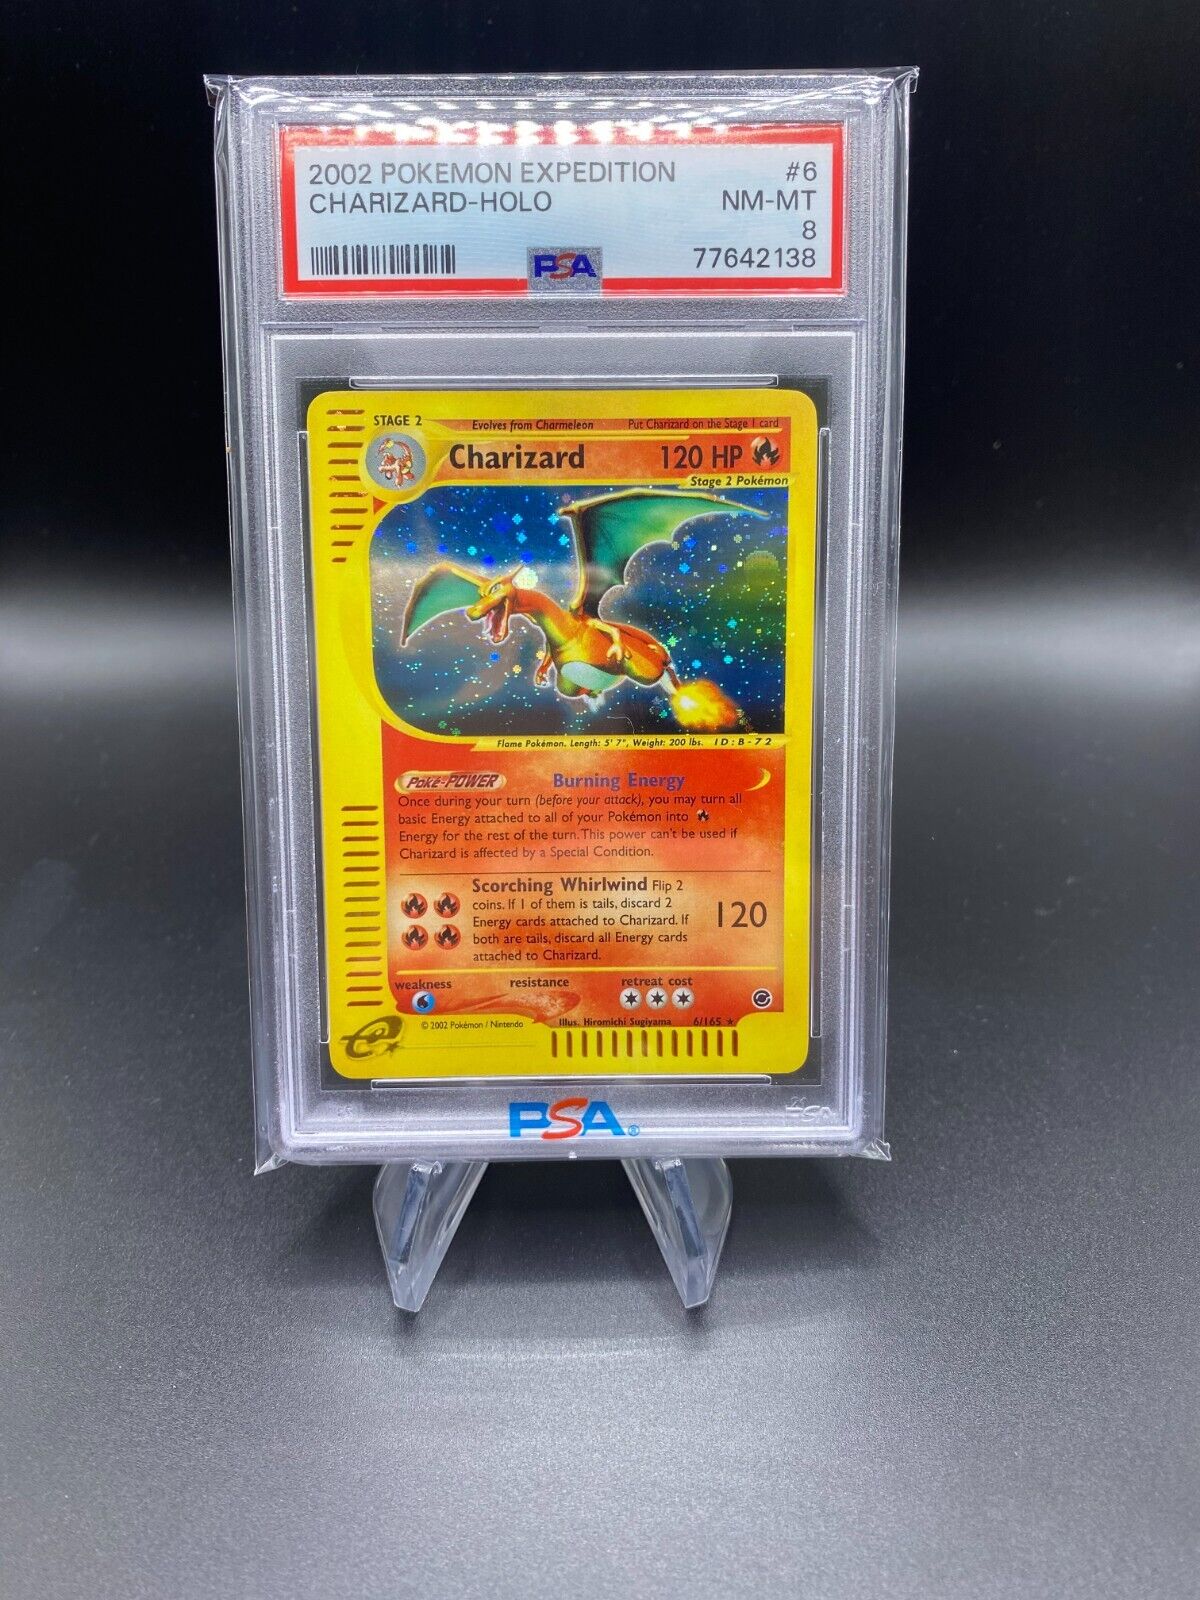 Pokemon Charizard Expedition Holo 6165 Englisch 2002 PSA 8 NMMT